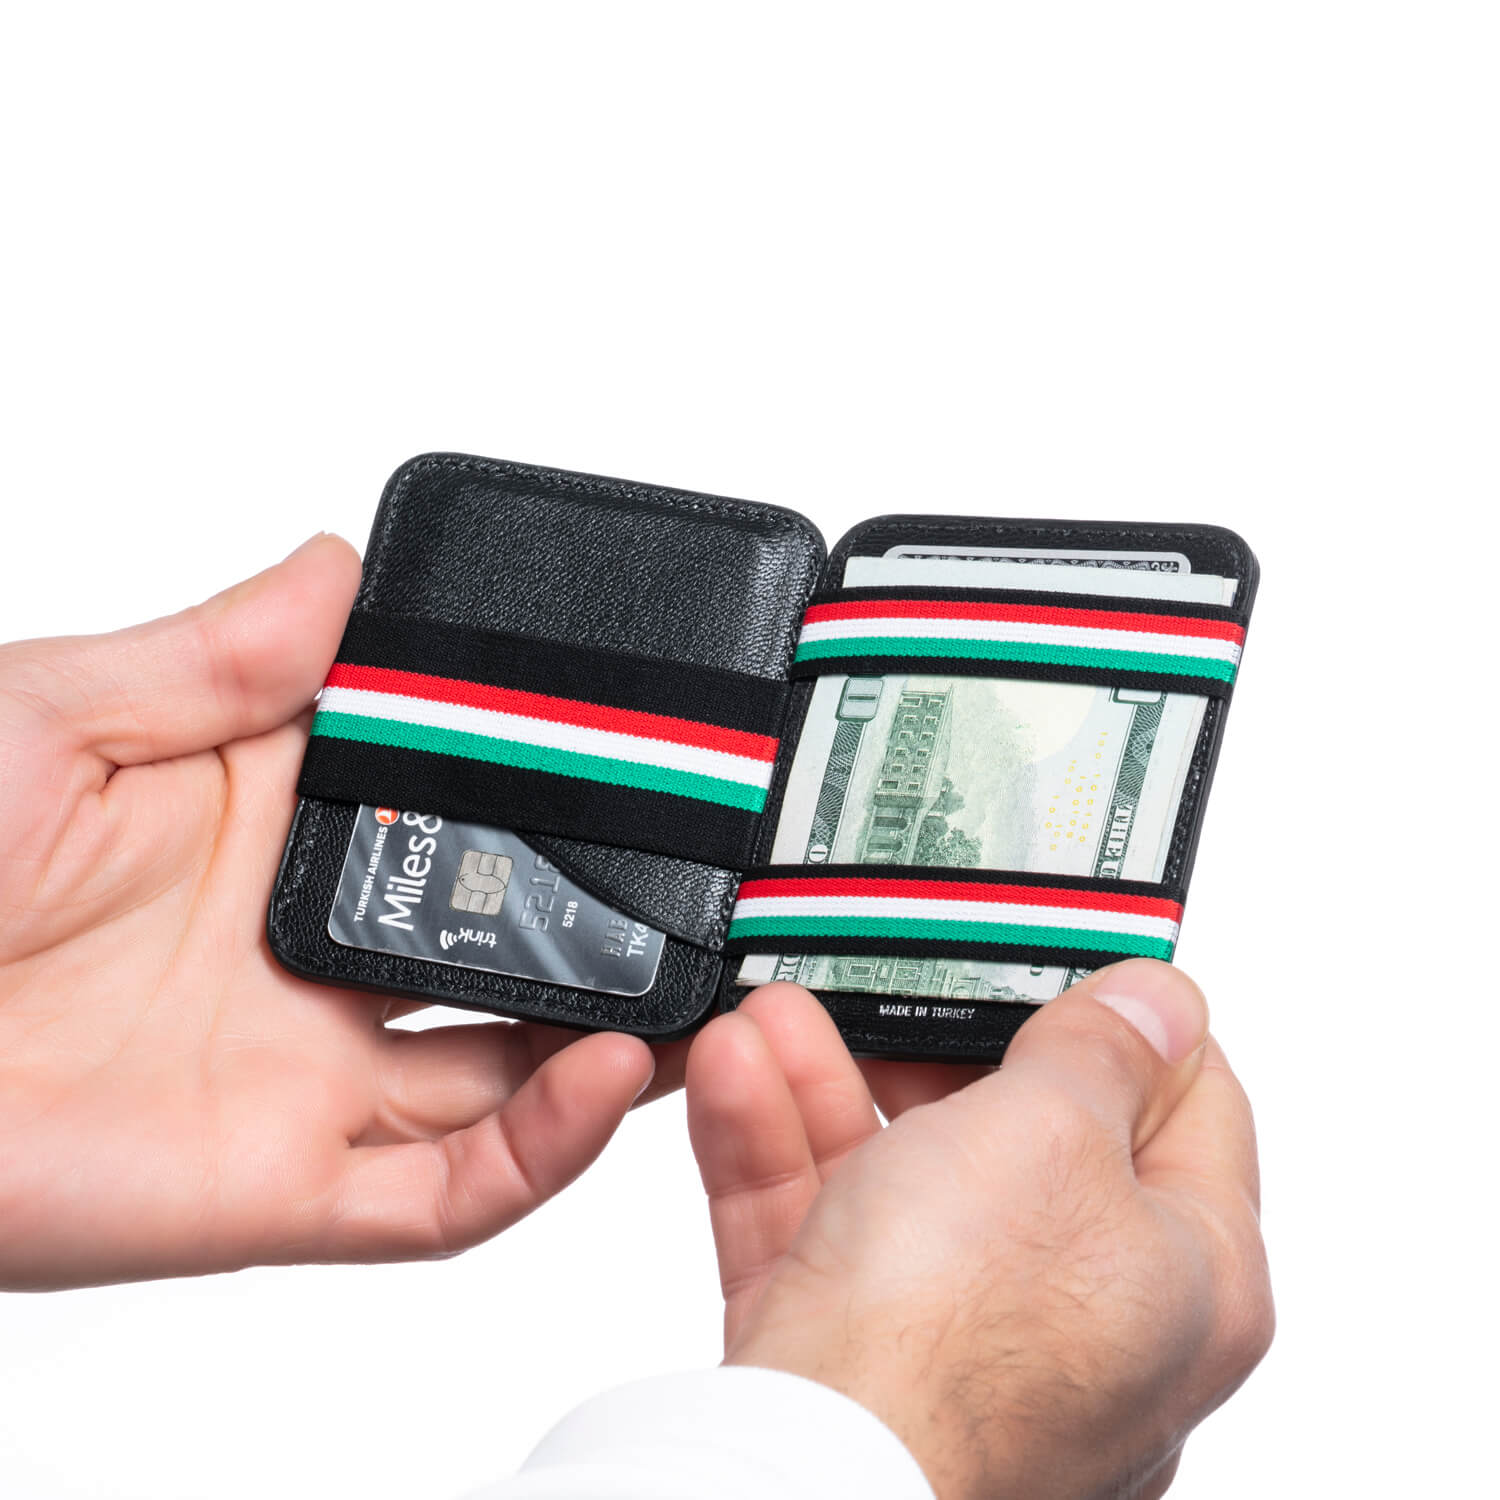 Serel's Magic V Wallet in the palm